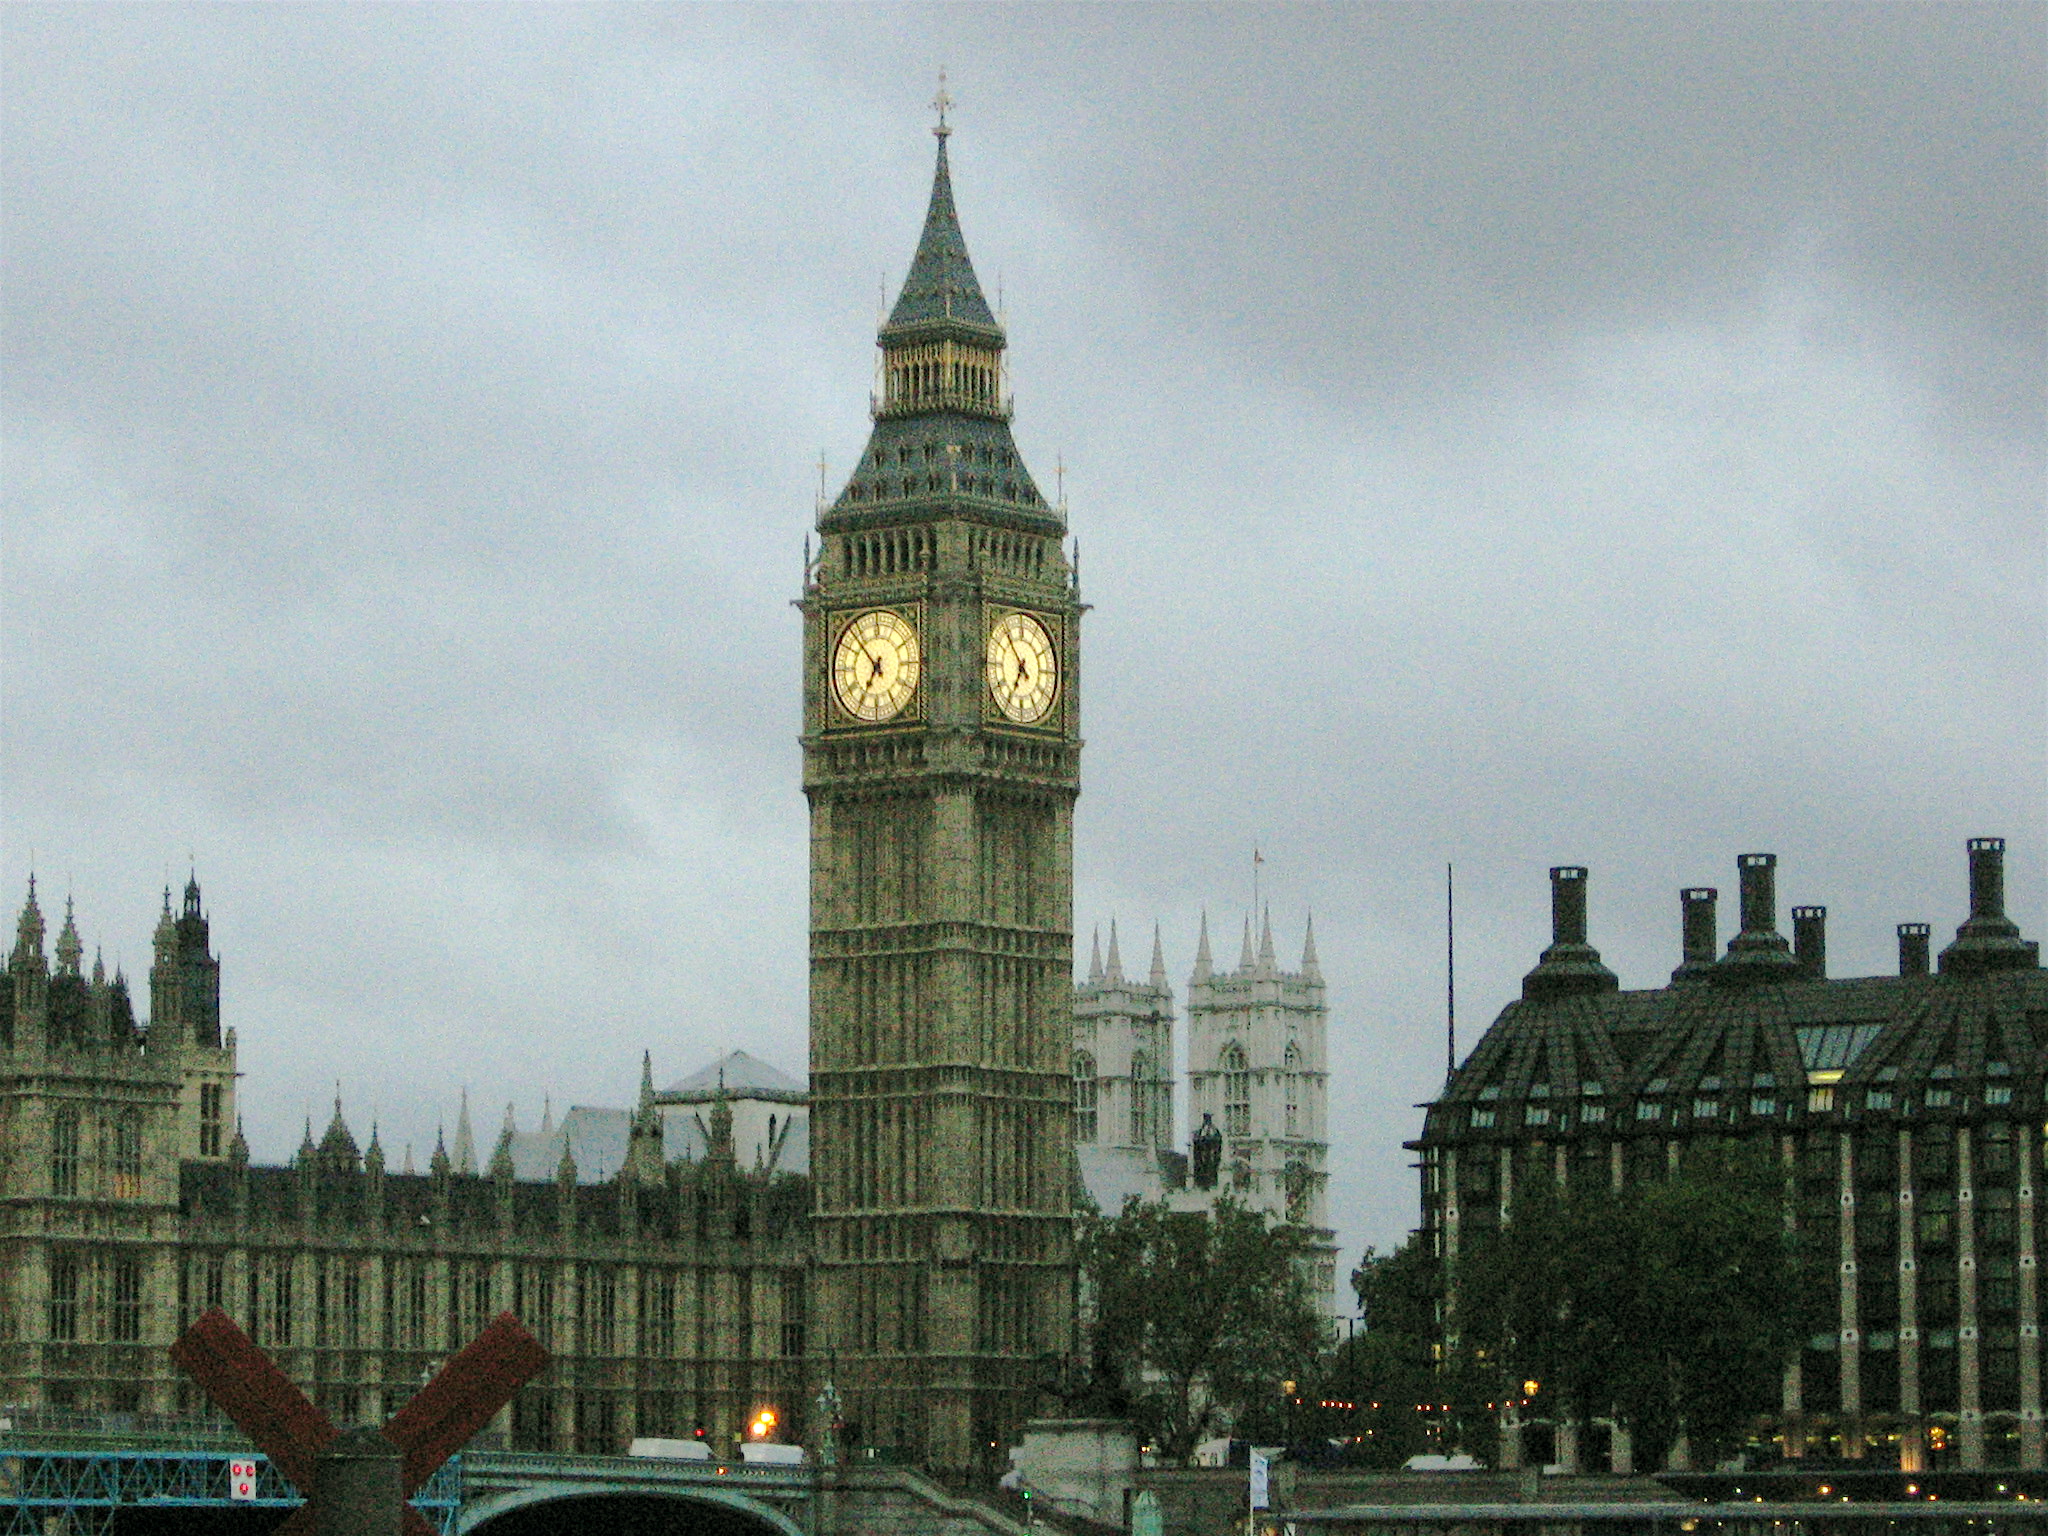 a tall tower that has a clock on top